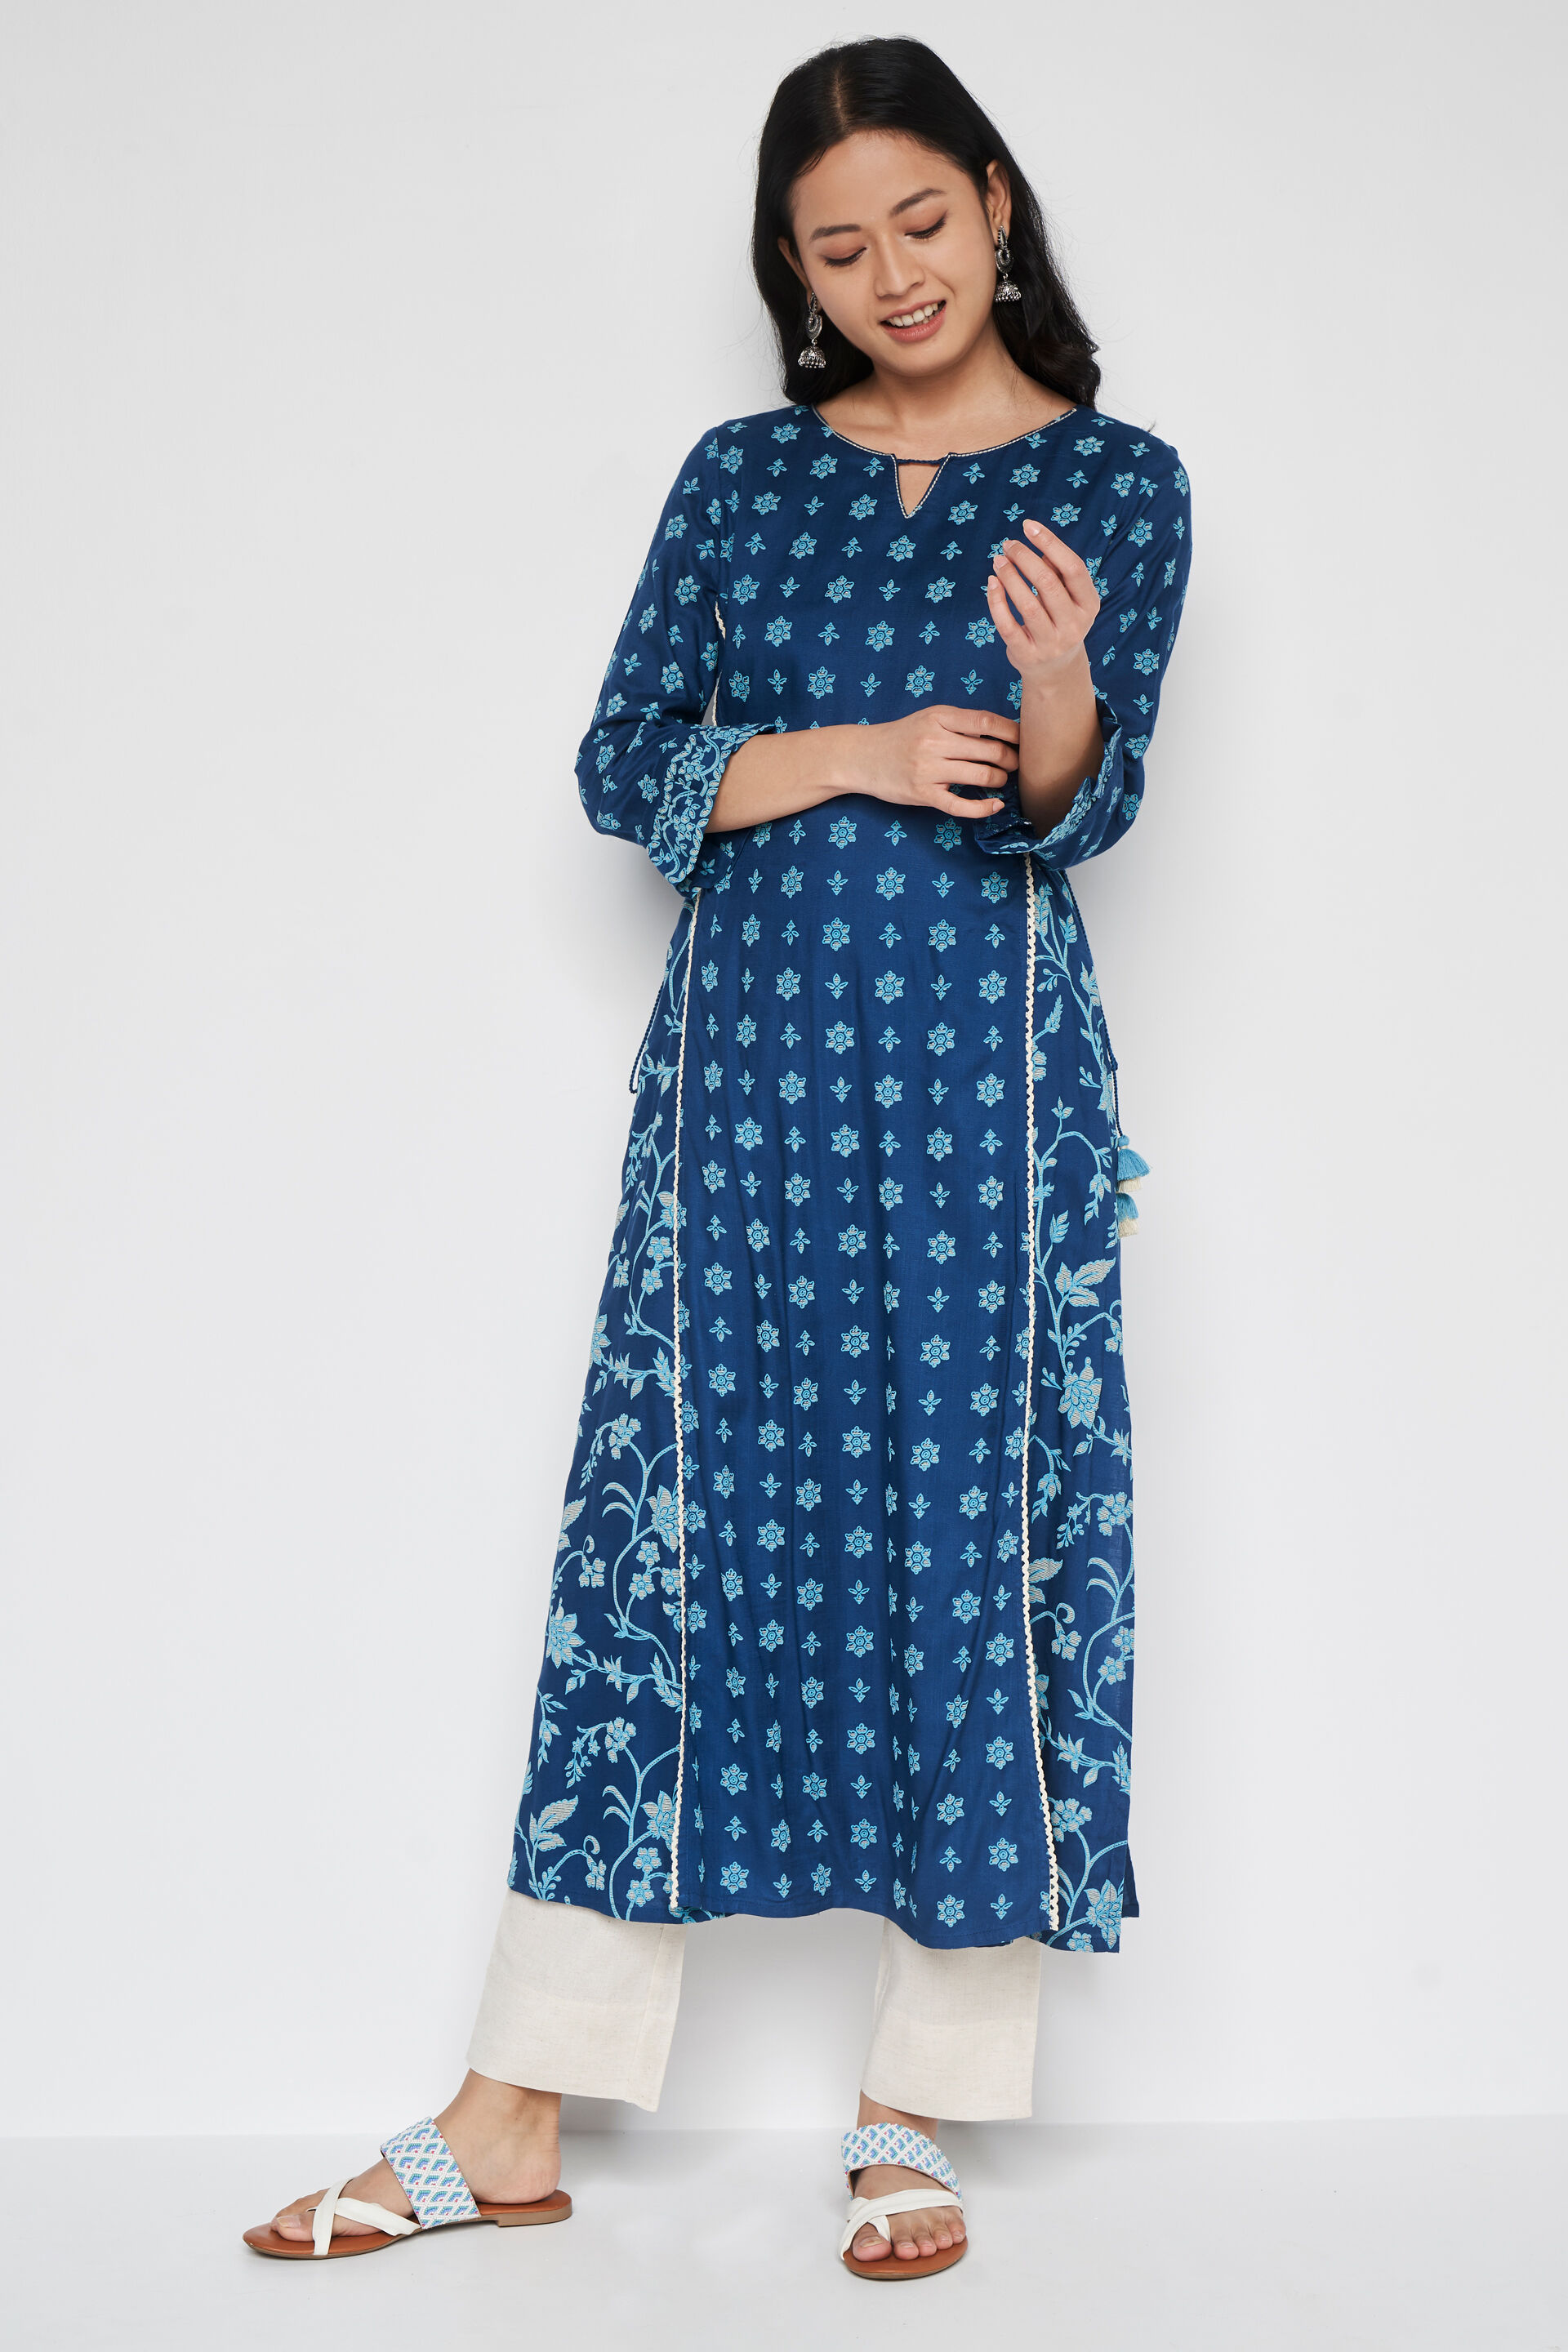 Buy GLOBAL DESI Solid Polyester High Neck Women's Tunic | Shoppers Stop